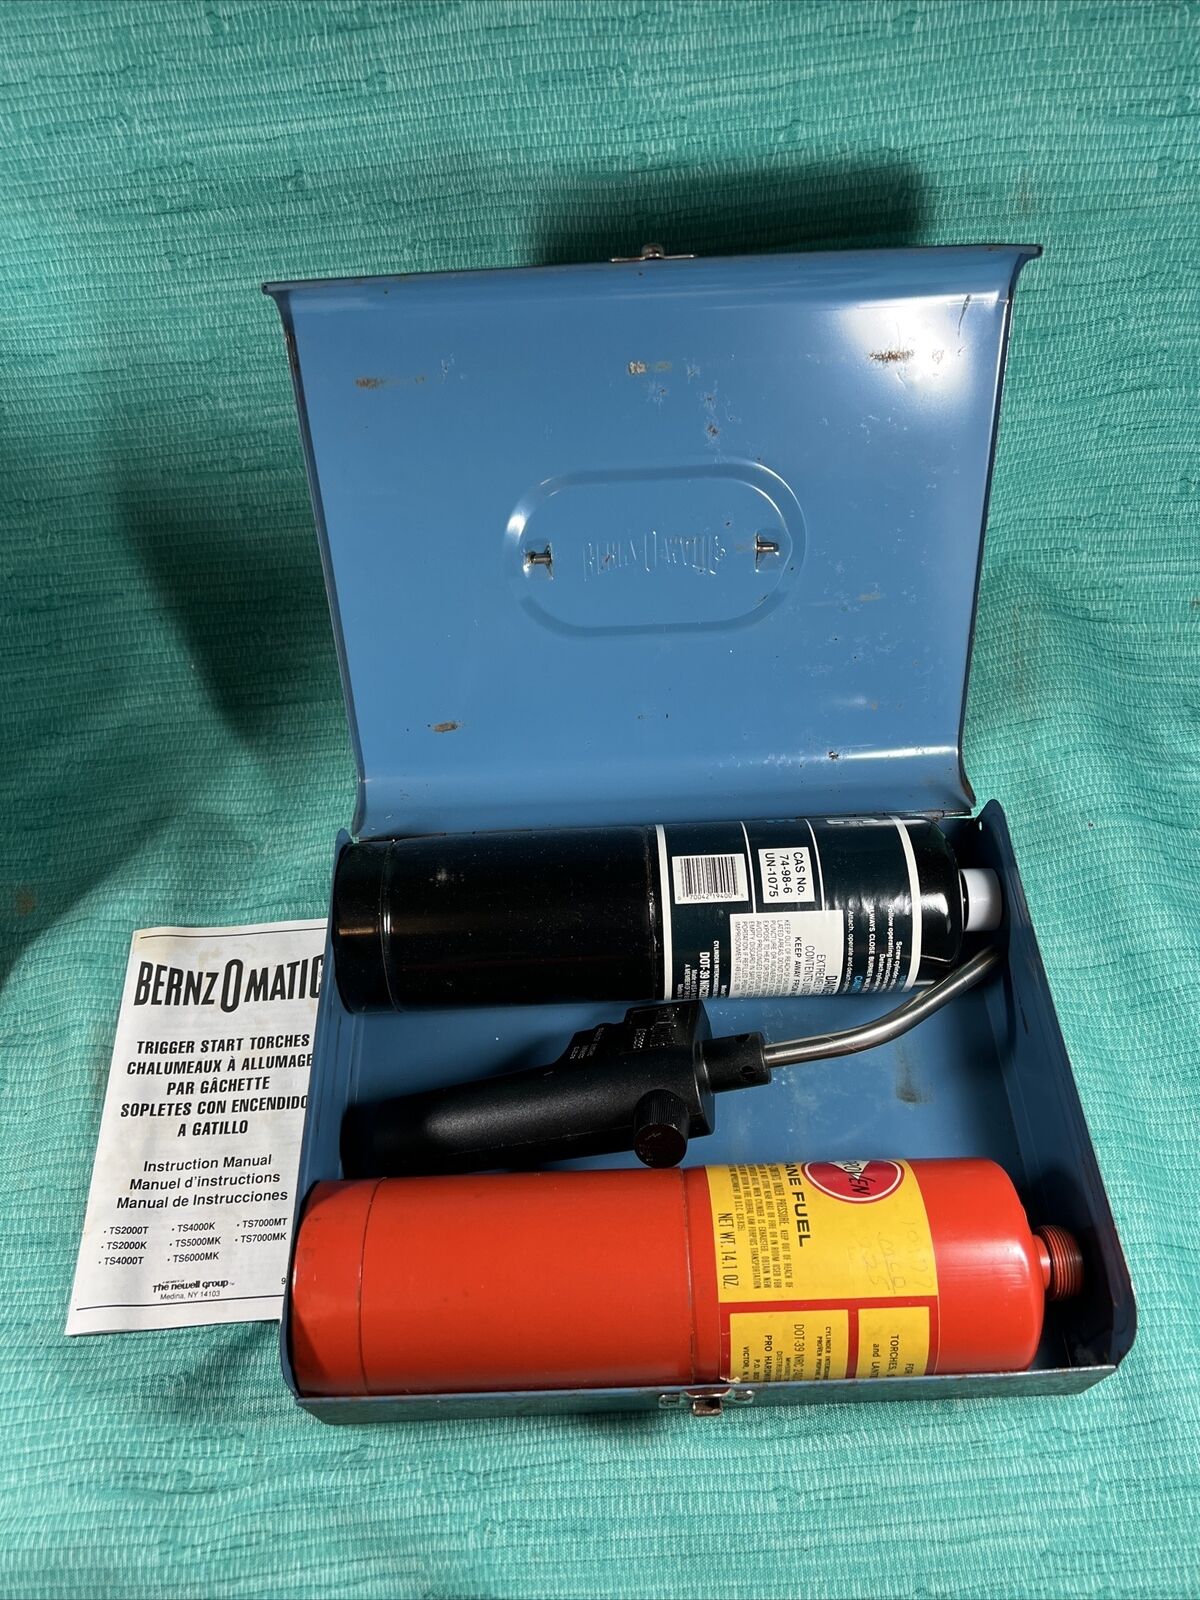 Vintage Bernz o matic Torch TS2000 in Metal Blue Box And Manual B4